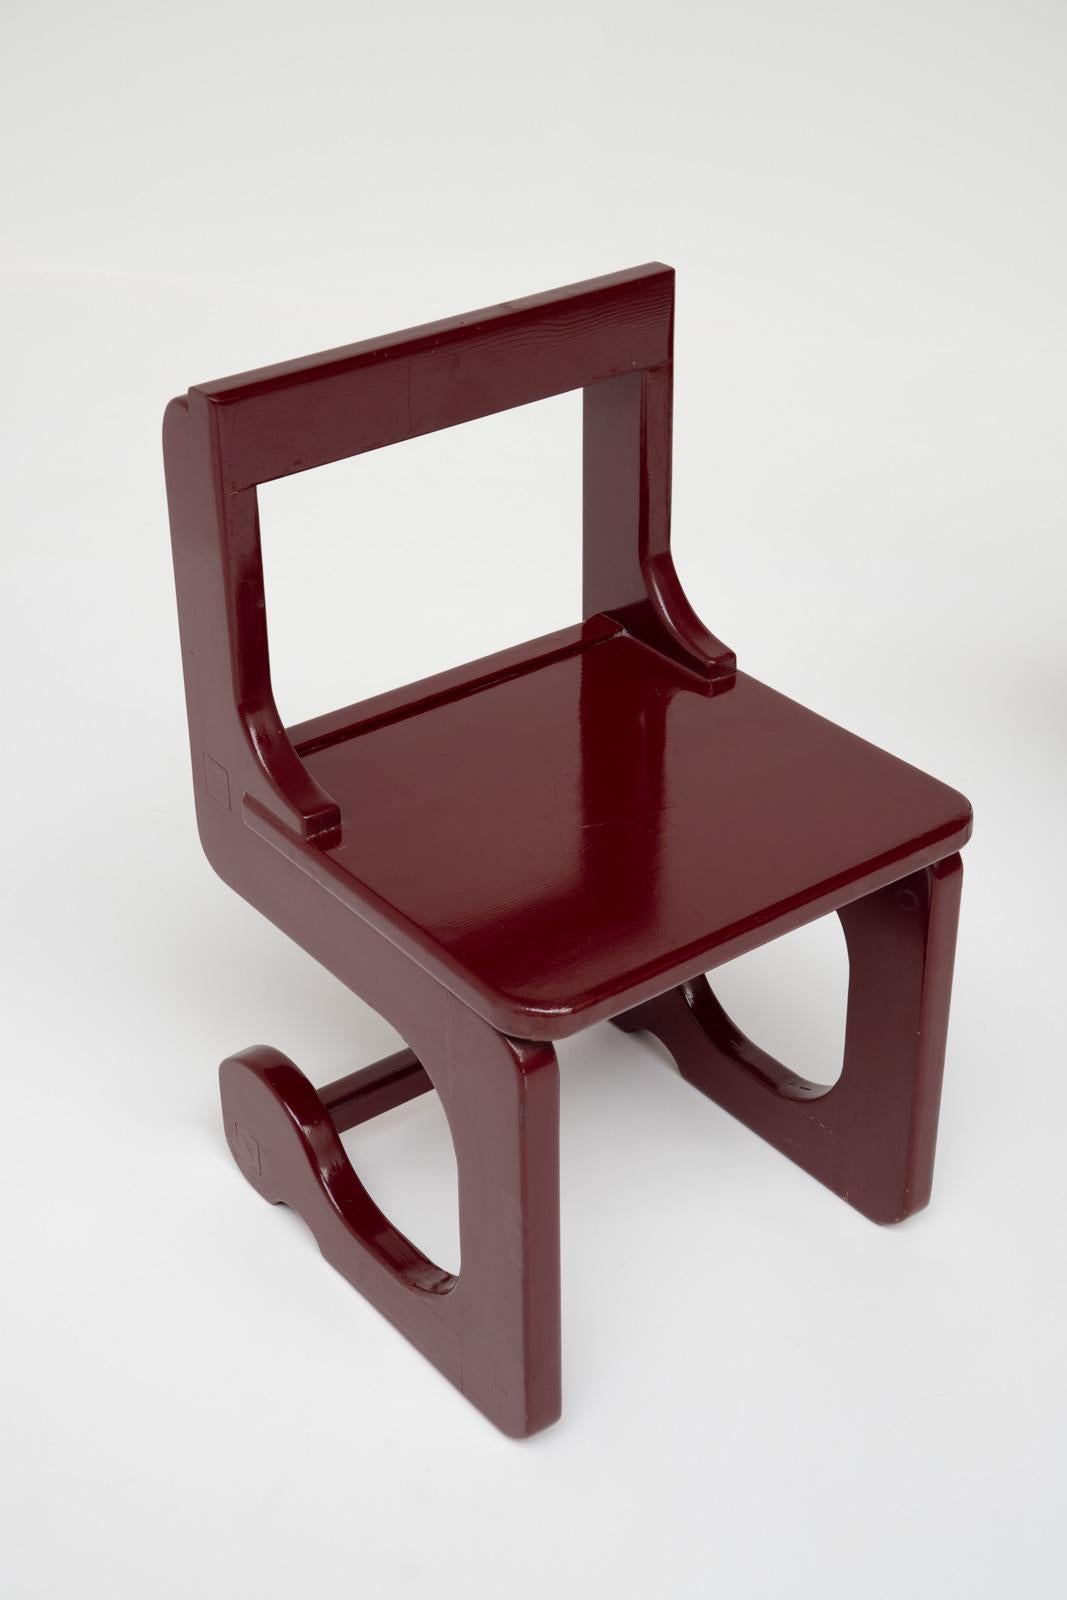 Late 20th Century Pair of Handcrafted Maroon Chairs, Italy, 1970s